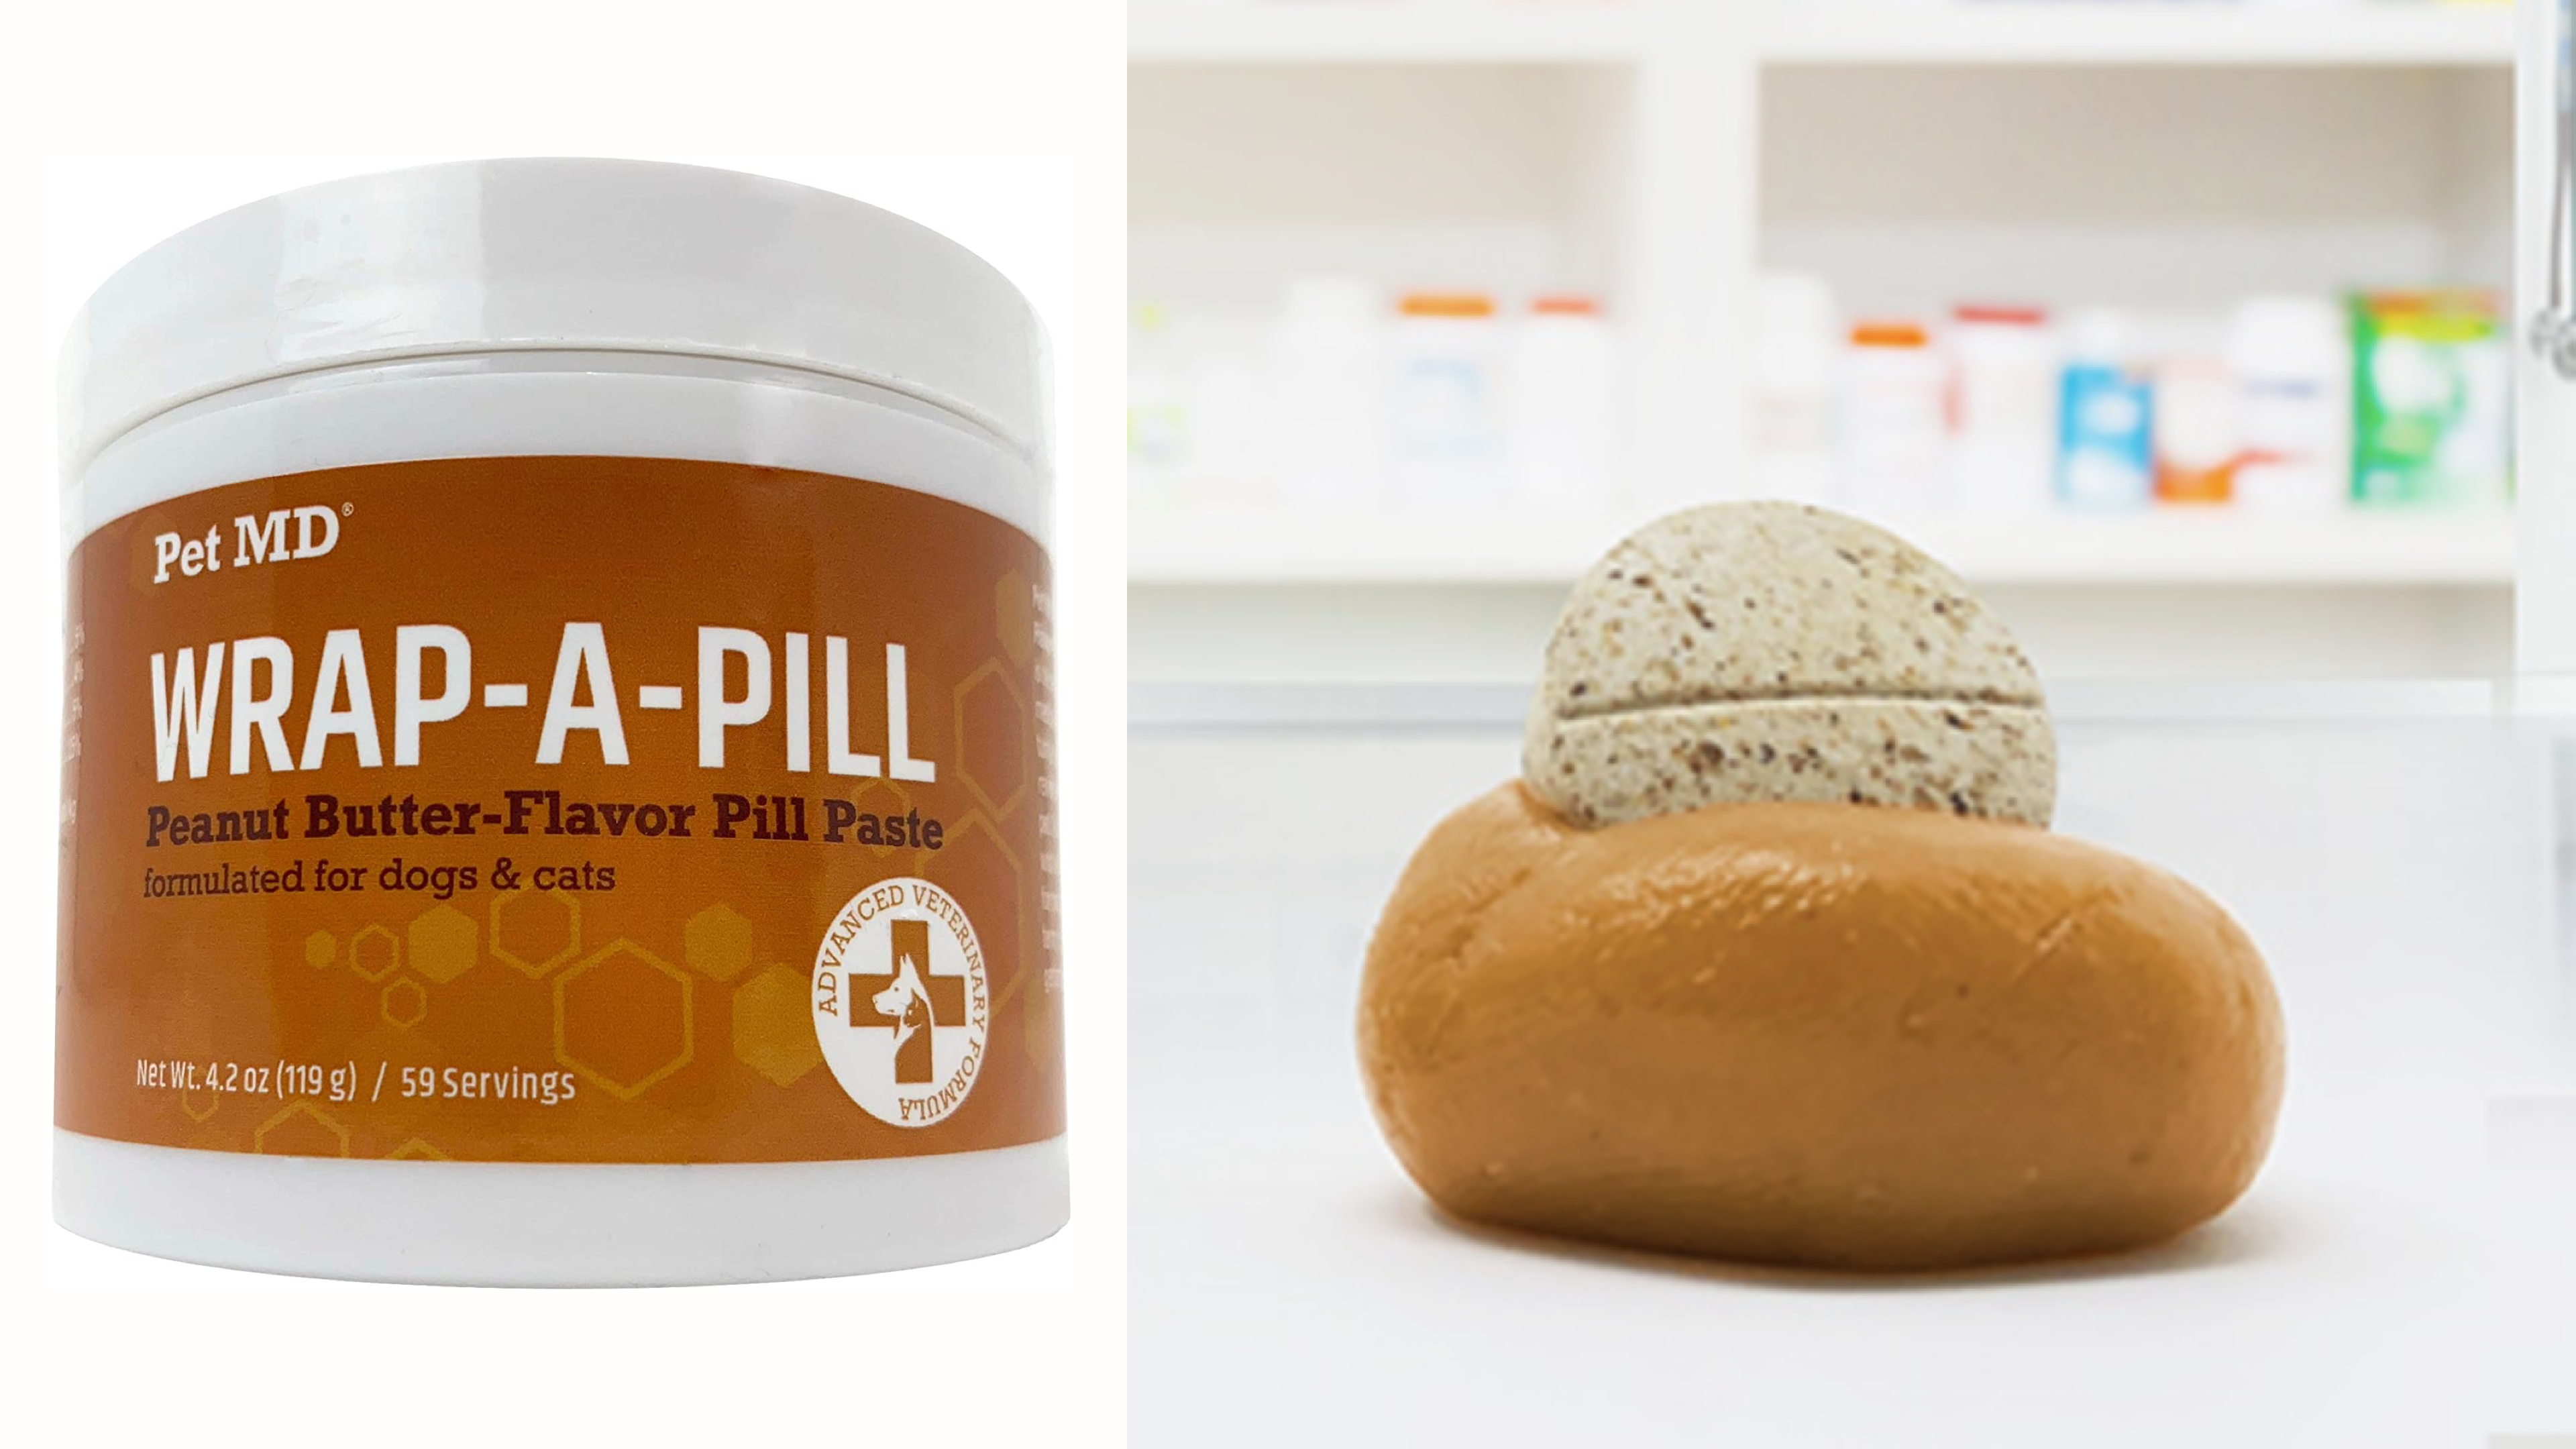 peanut butter-flavored pill paste to help mask the taste and smell of pet medication